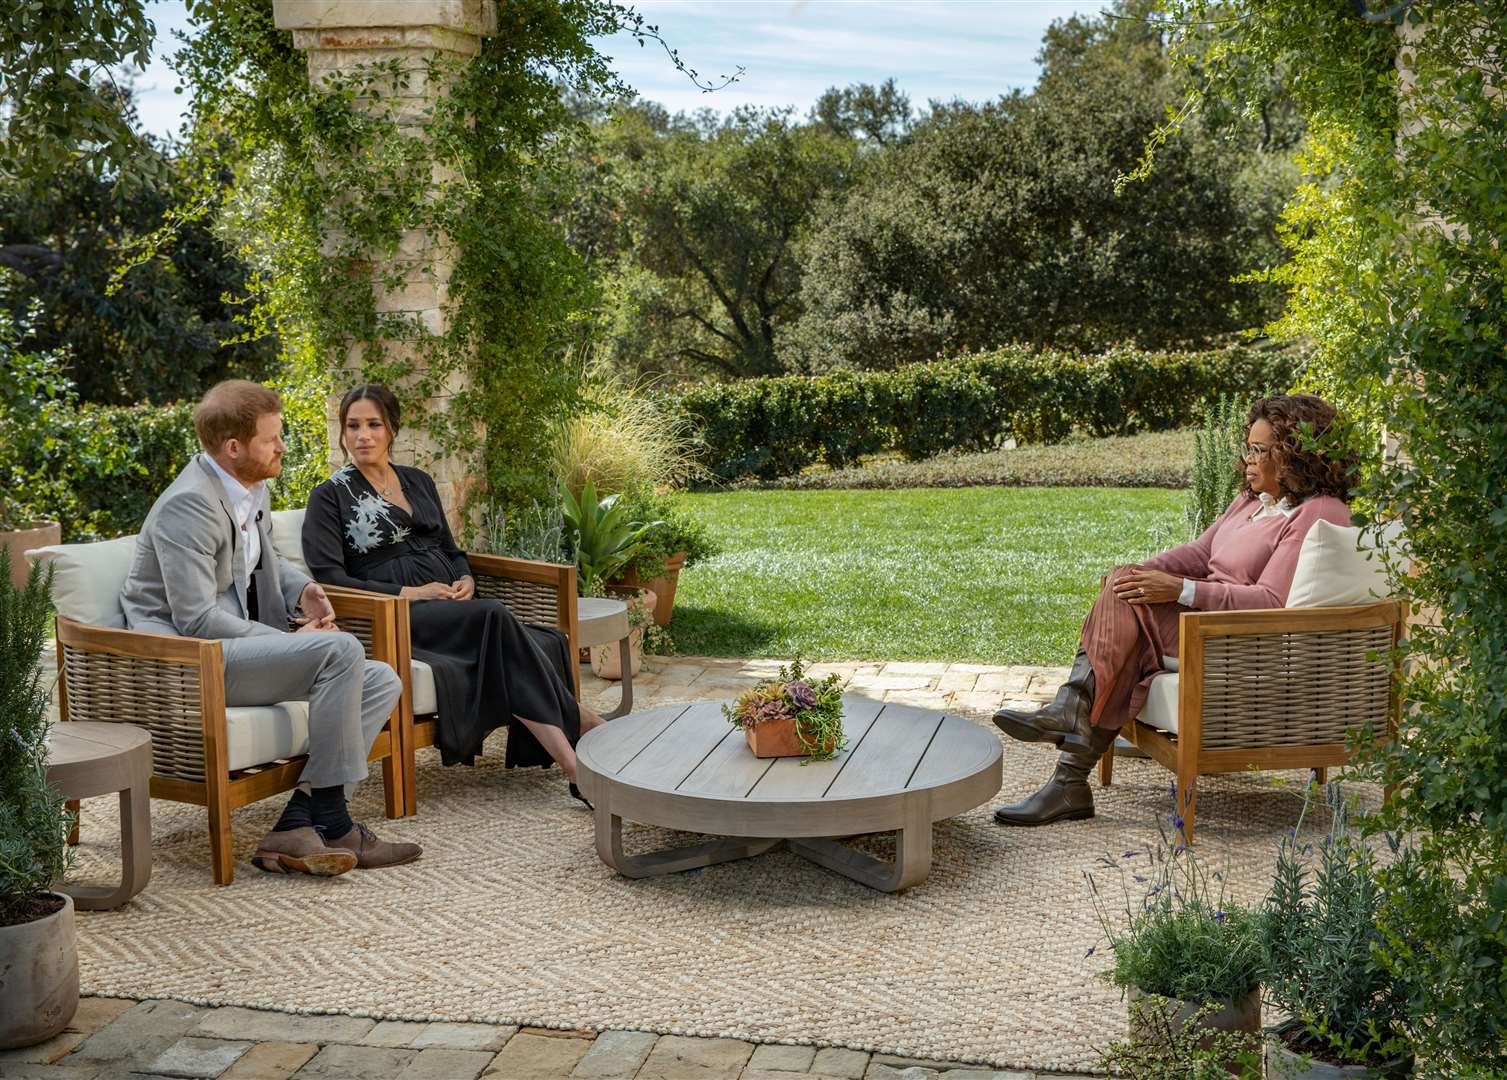 Harry and Meghan during their Oprah Winfrey interview. Harpo Productions /Joe Pugliese